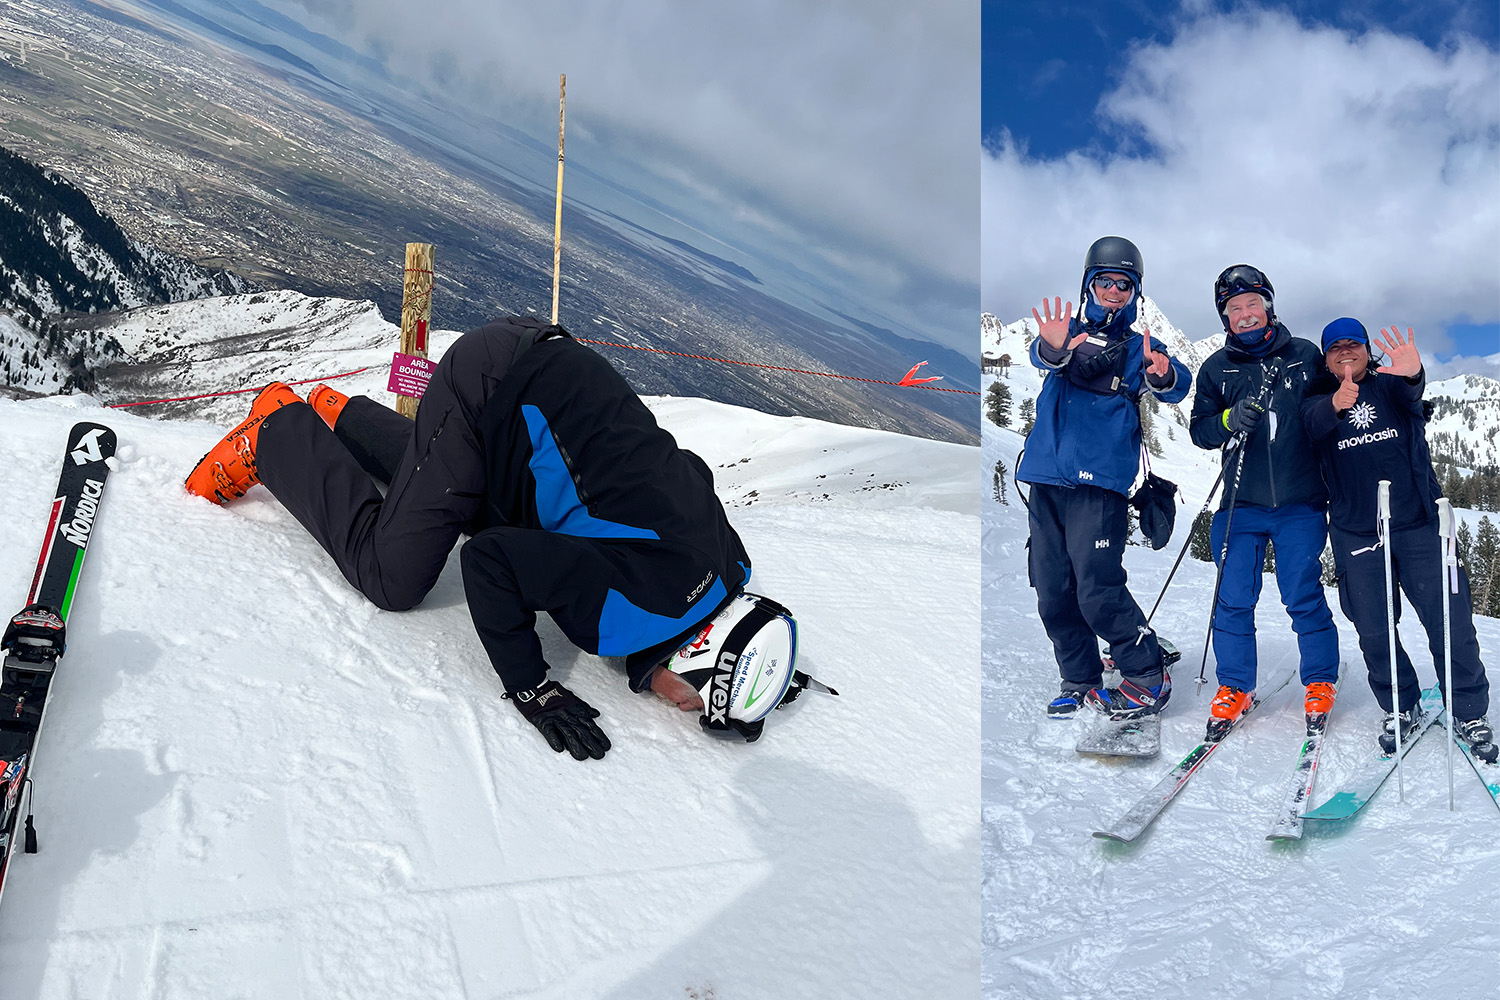 A split image: on the left, Racer Tom kissing the snow, and on the right, him celebrating with skiing friends.